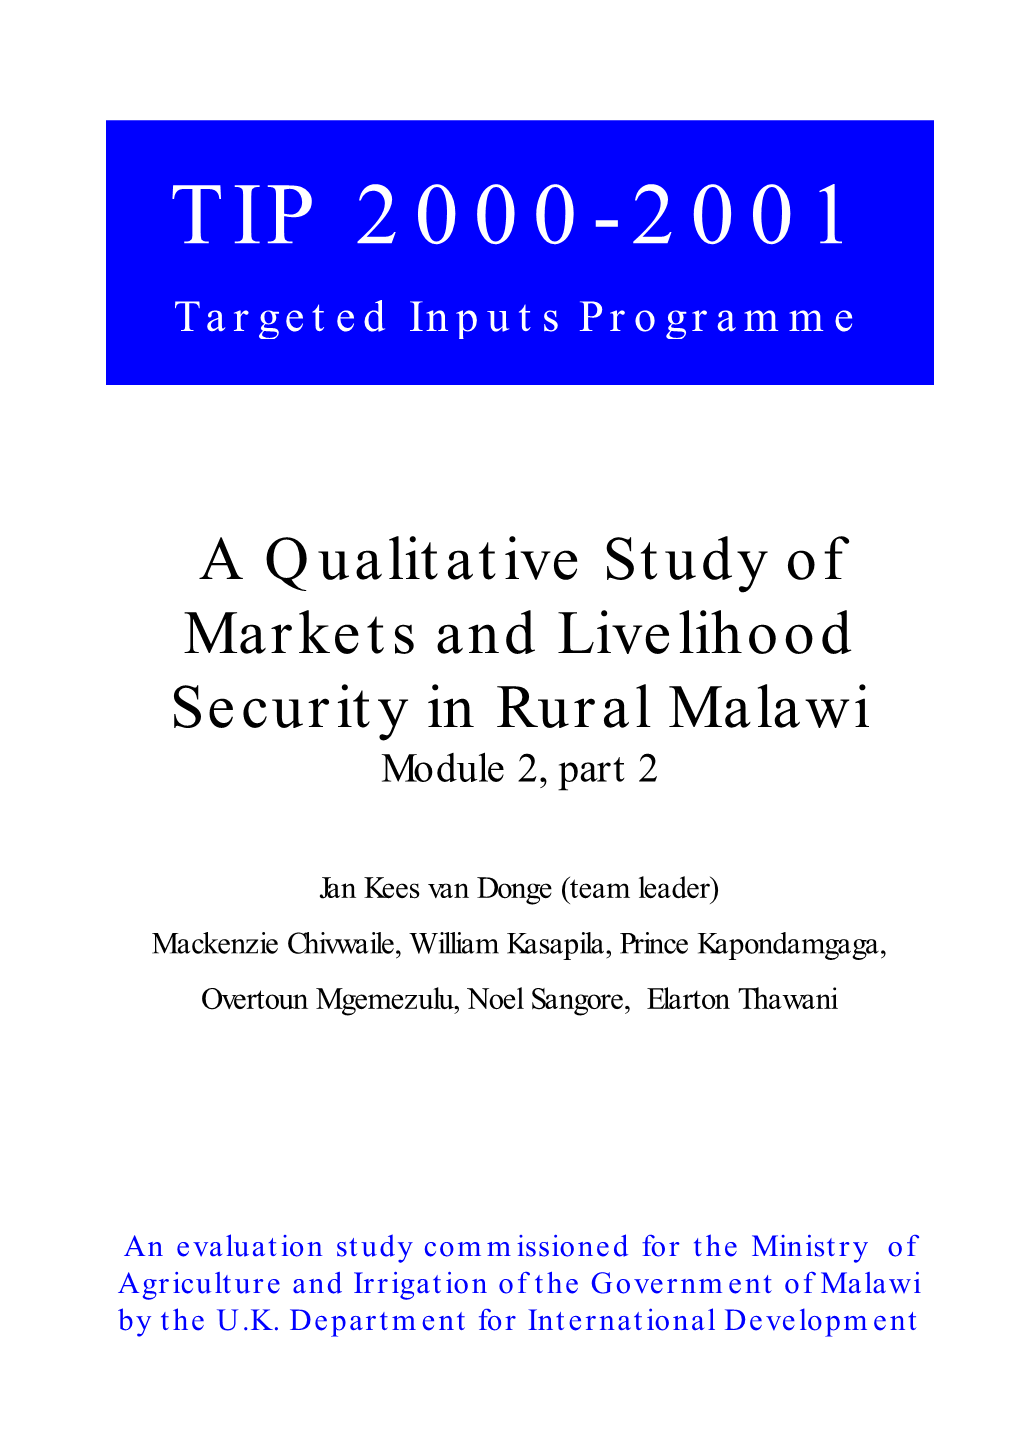 A Qualitative Study of Markets and Livelihood Security in Rural Malawi Module 2, Part 2